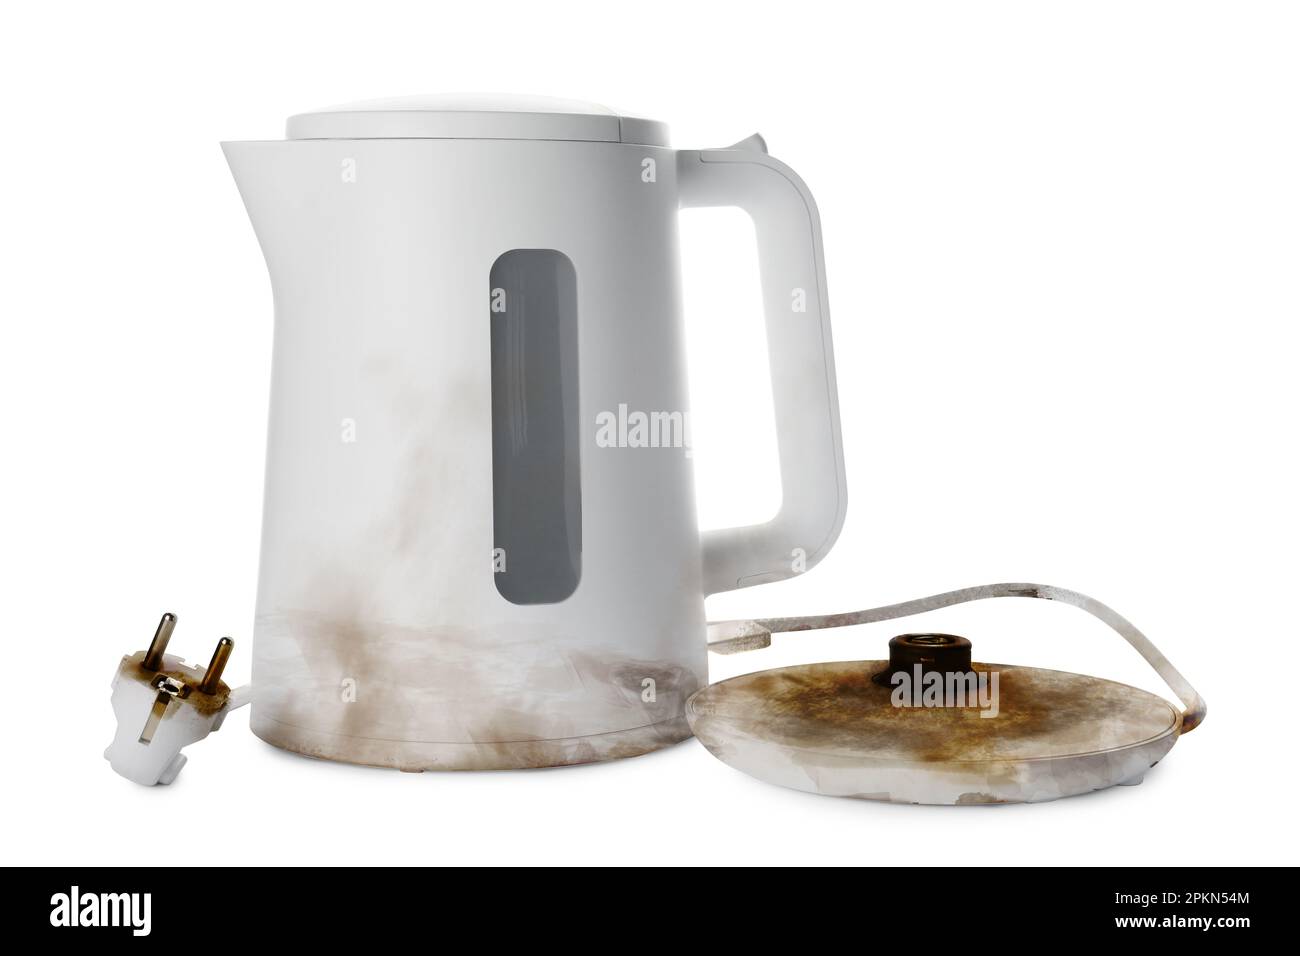 https://c8.alamy.com/comp/2PKN54M/burnt-electric-kettle-with-base-and-plug-on-white-background-2PKN54M.jpg